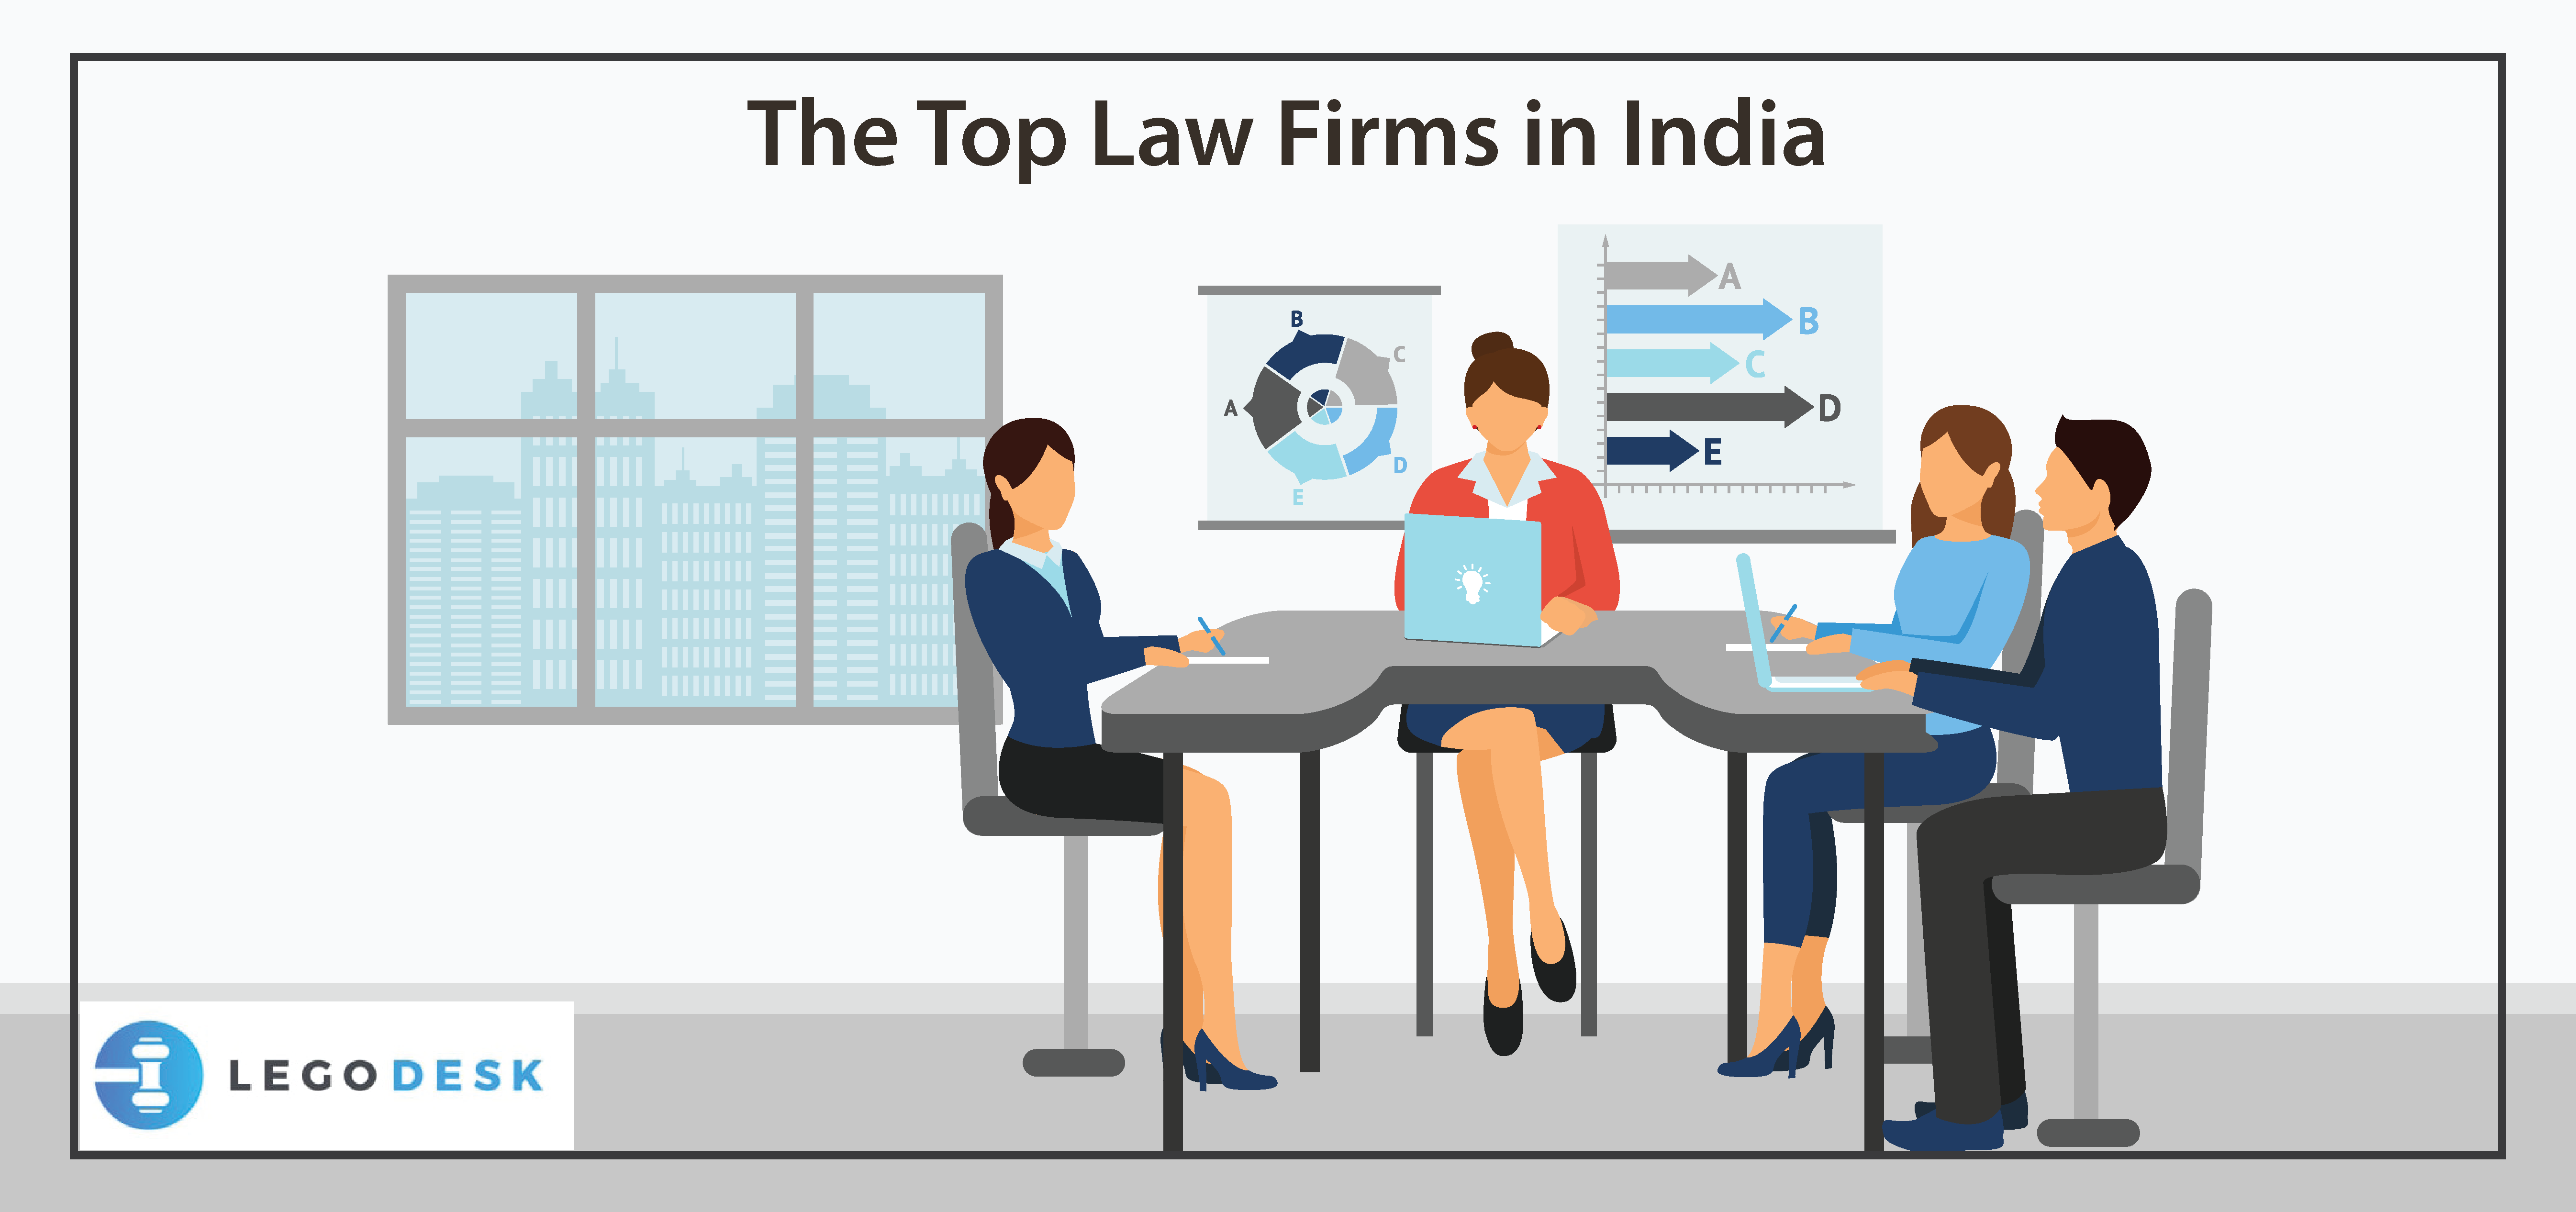 The Top Law Firms in India – The best of the best